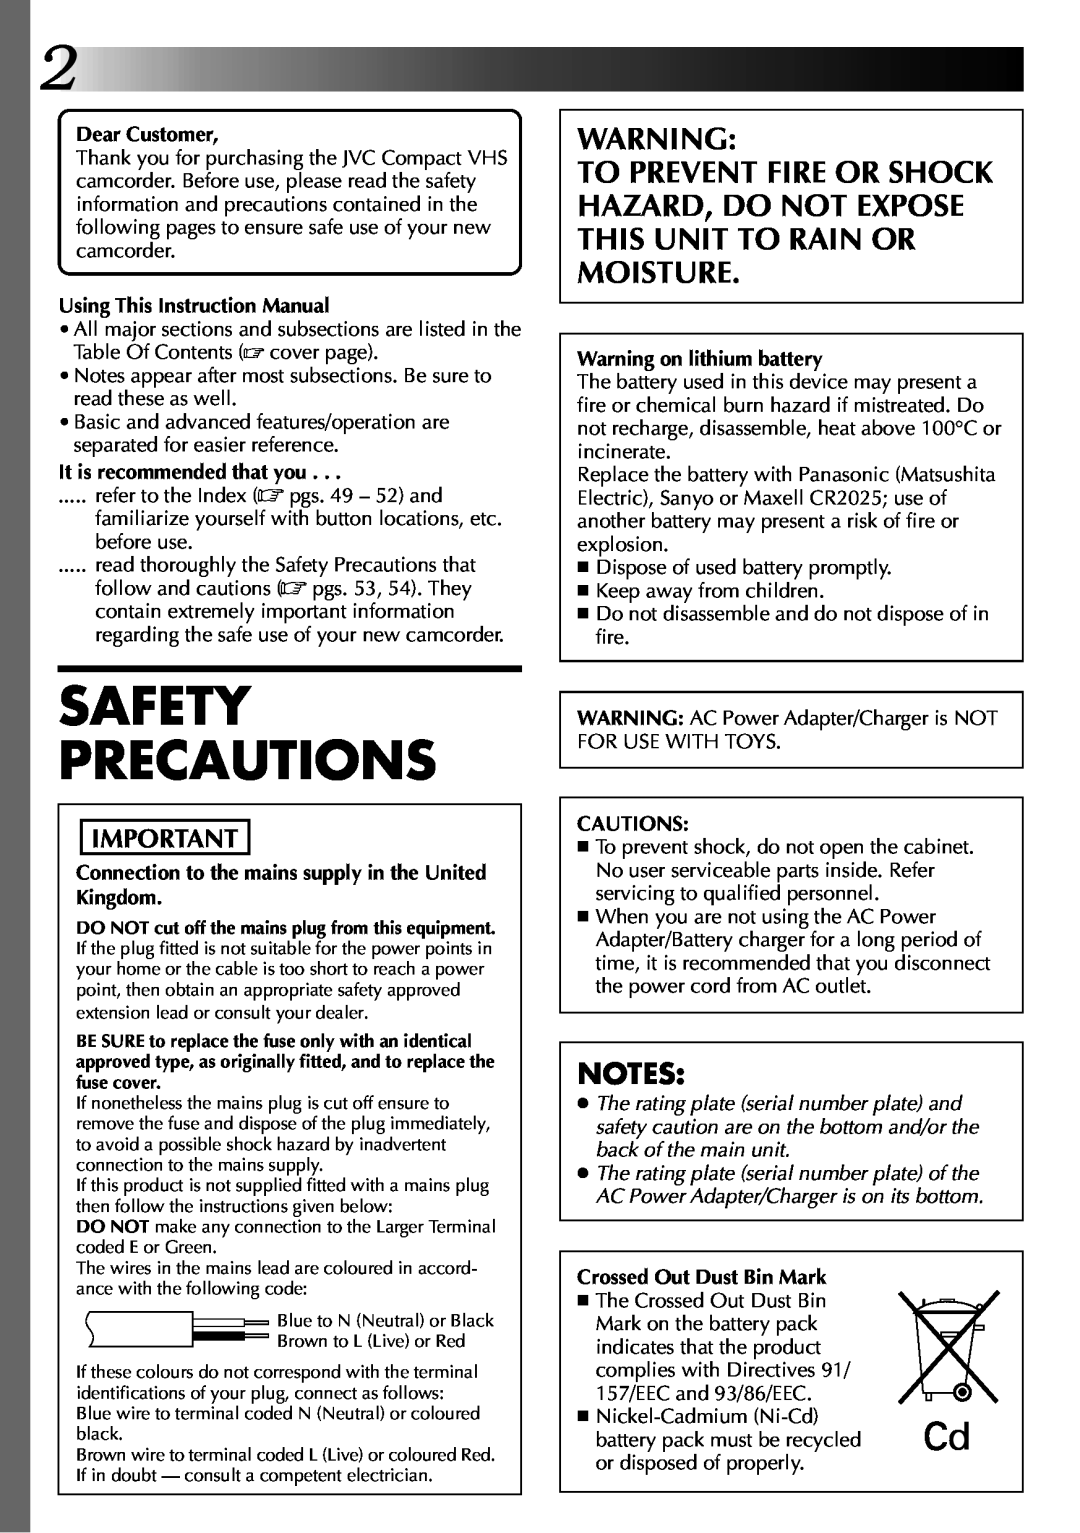 JVC LYT0002-0Q4A Safety Precautions, Dear Customer, Using This Instruction Manual, It is recommended that you, Cautions 